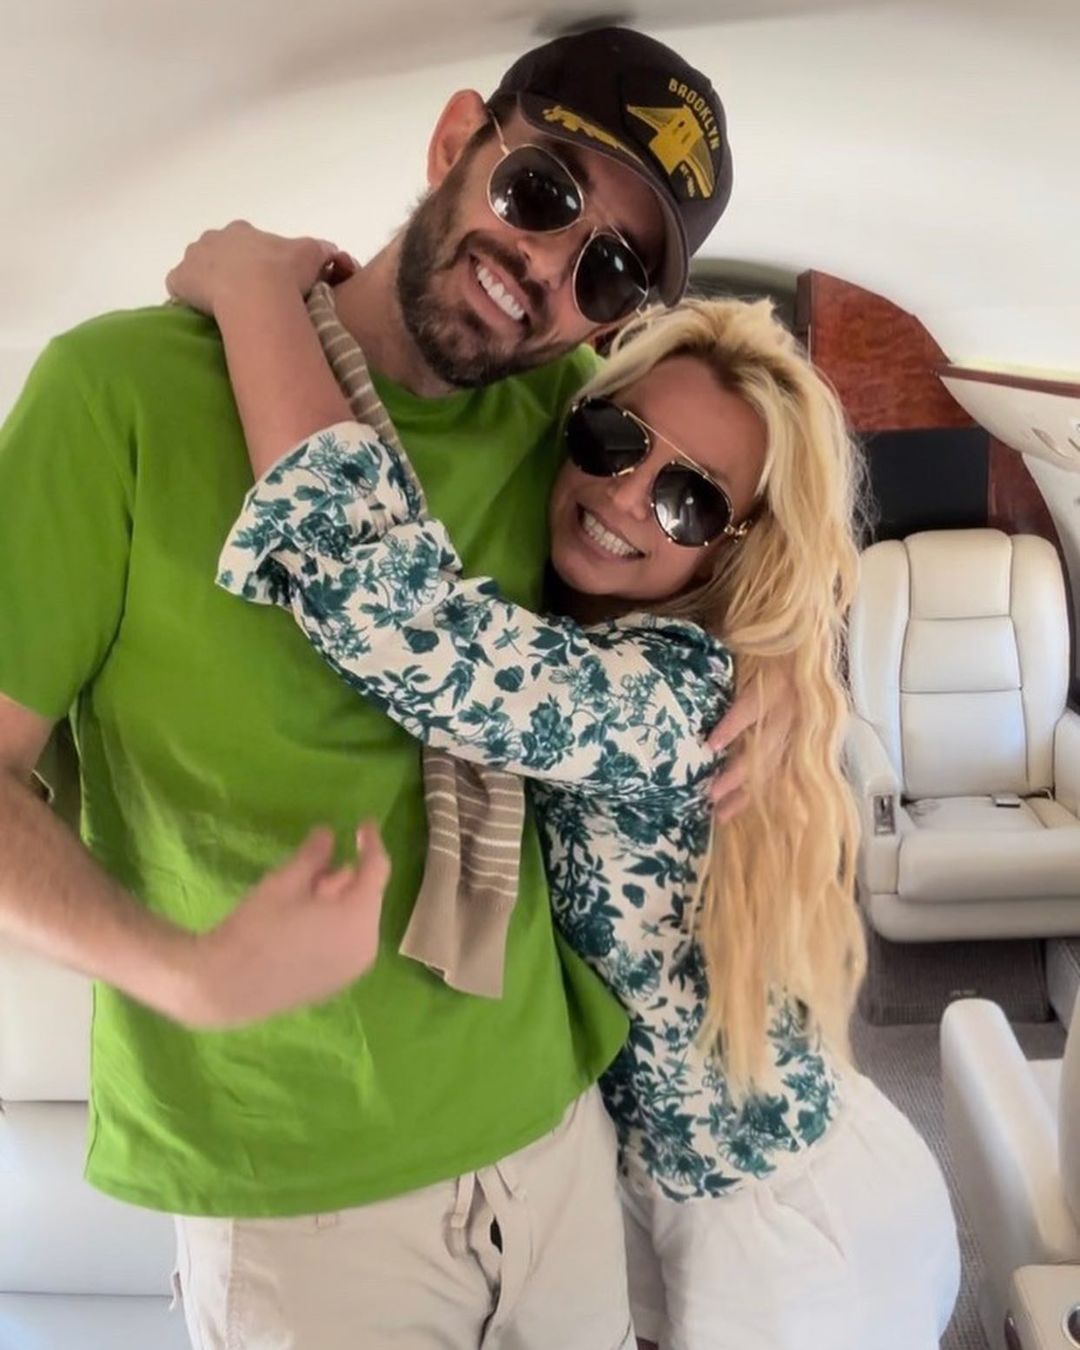 Britney Spears ditched her wedding ring while vacationing with pal Cade Hudson (pictured here) and not husband Sam Asghari.